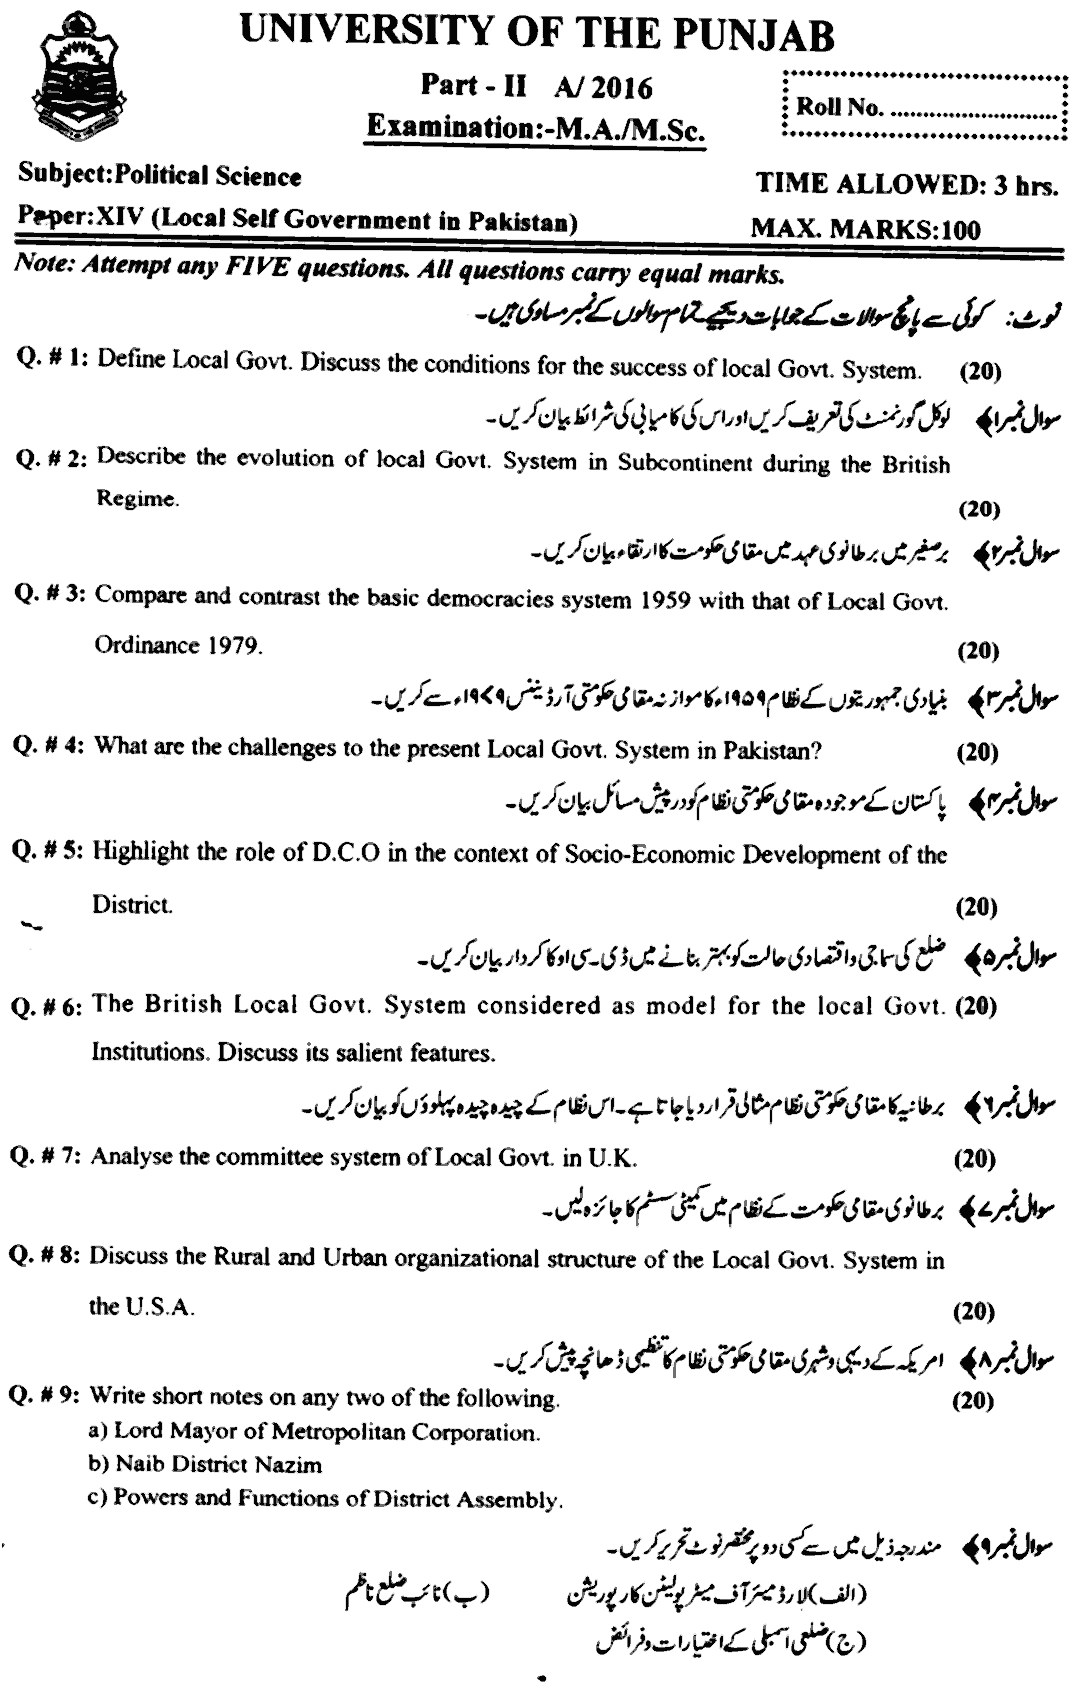 MA Part 2 Political Science Local Self Government In Pakistan Past Paper 2016 Punjab University